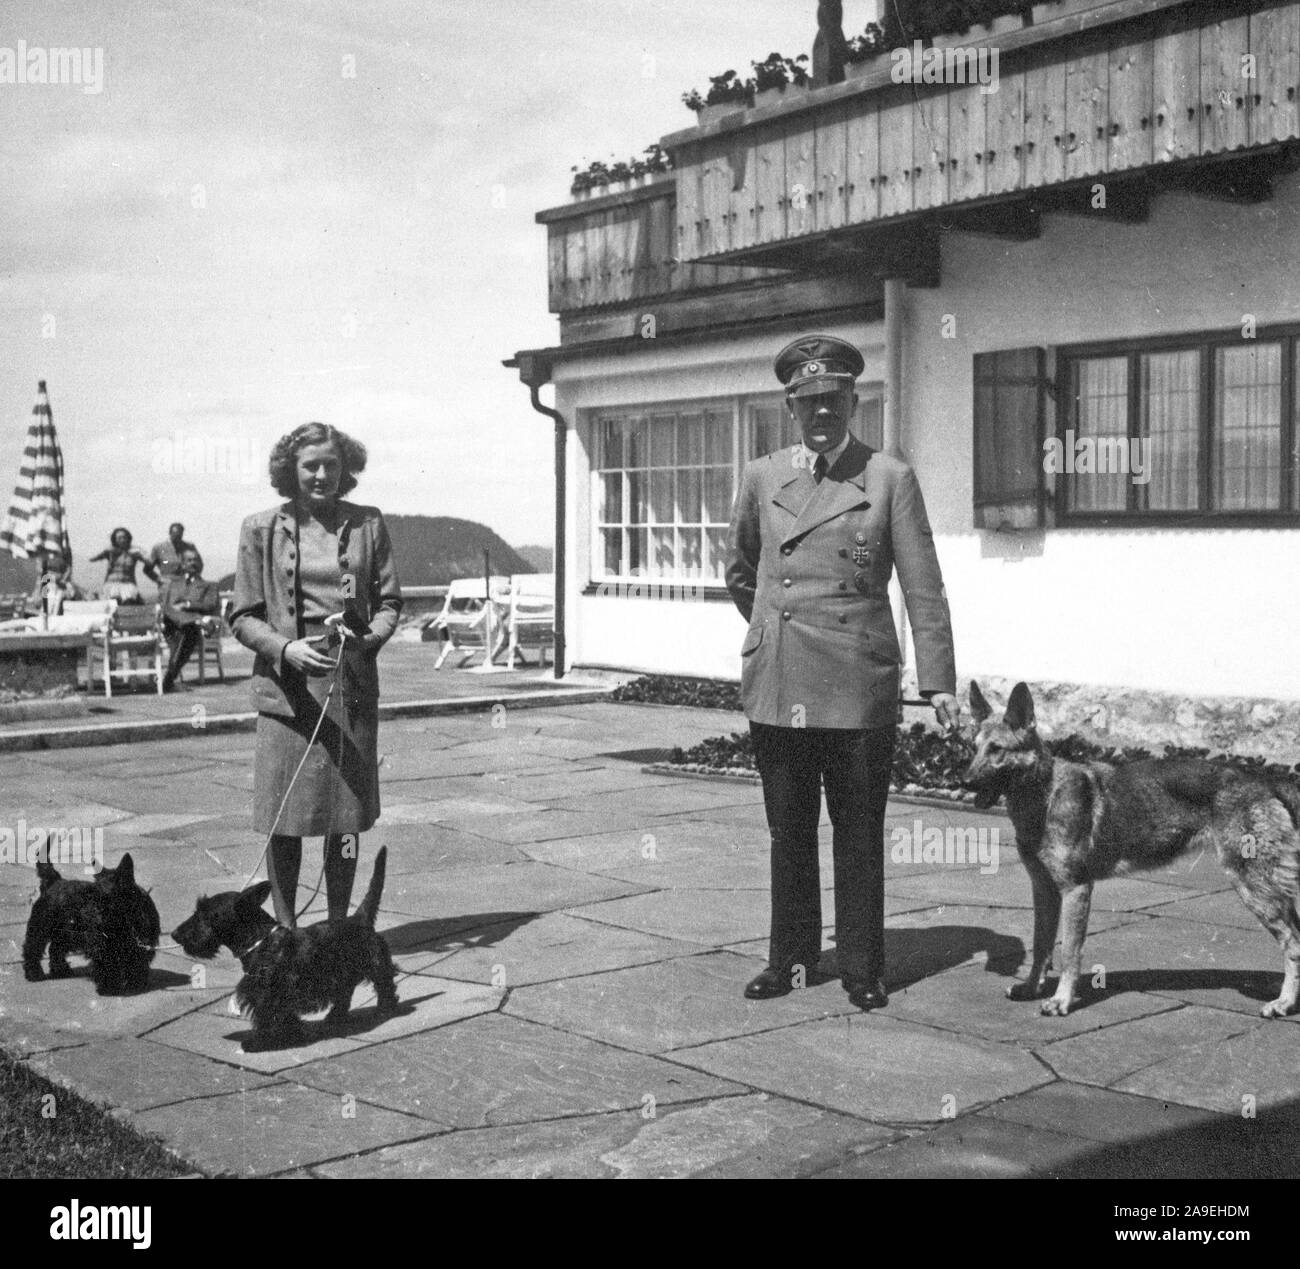 Eva Braun Collection (cetrnaest) - Eva Braun and Adolf Hitler and their dogs ca. late 1930s or early 1940s Stock Photo